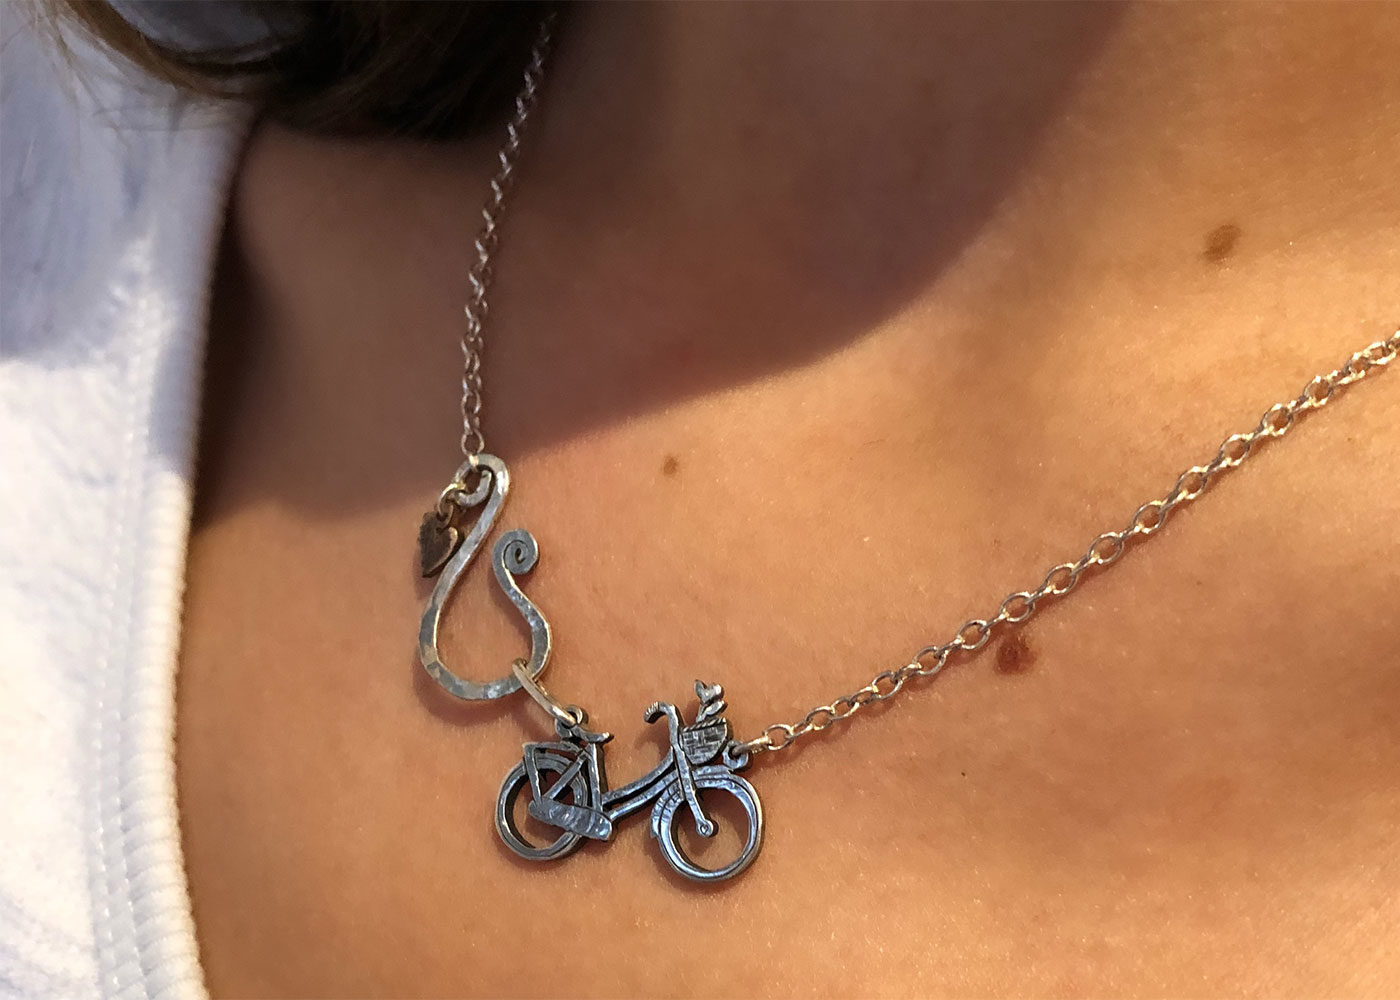 Bicycle necklace handcrafted and created with environmental awareness. Recycled silver coin jewellery made in Cambridge